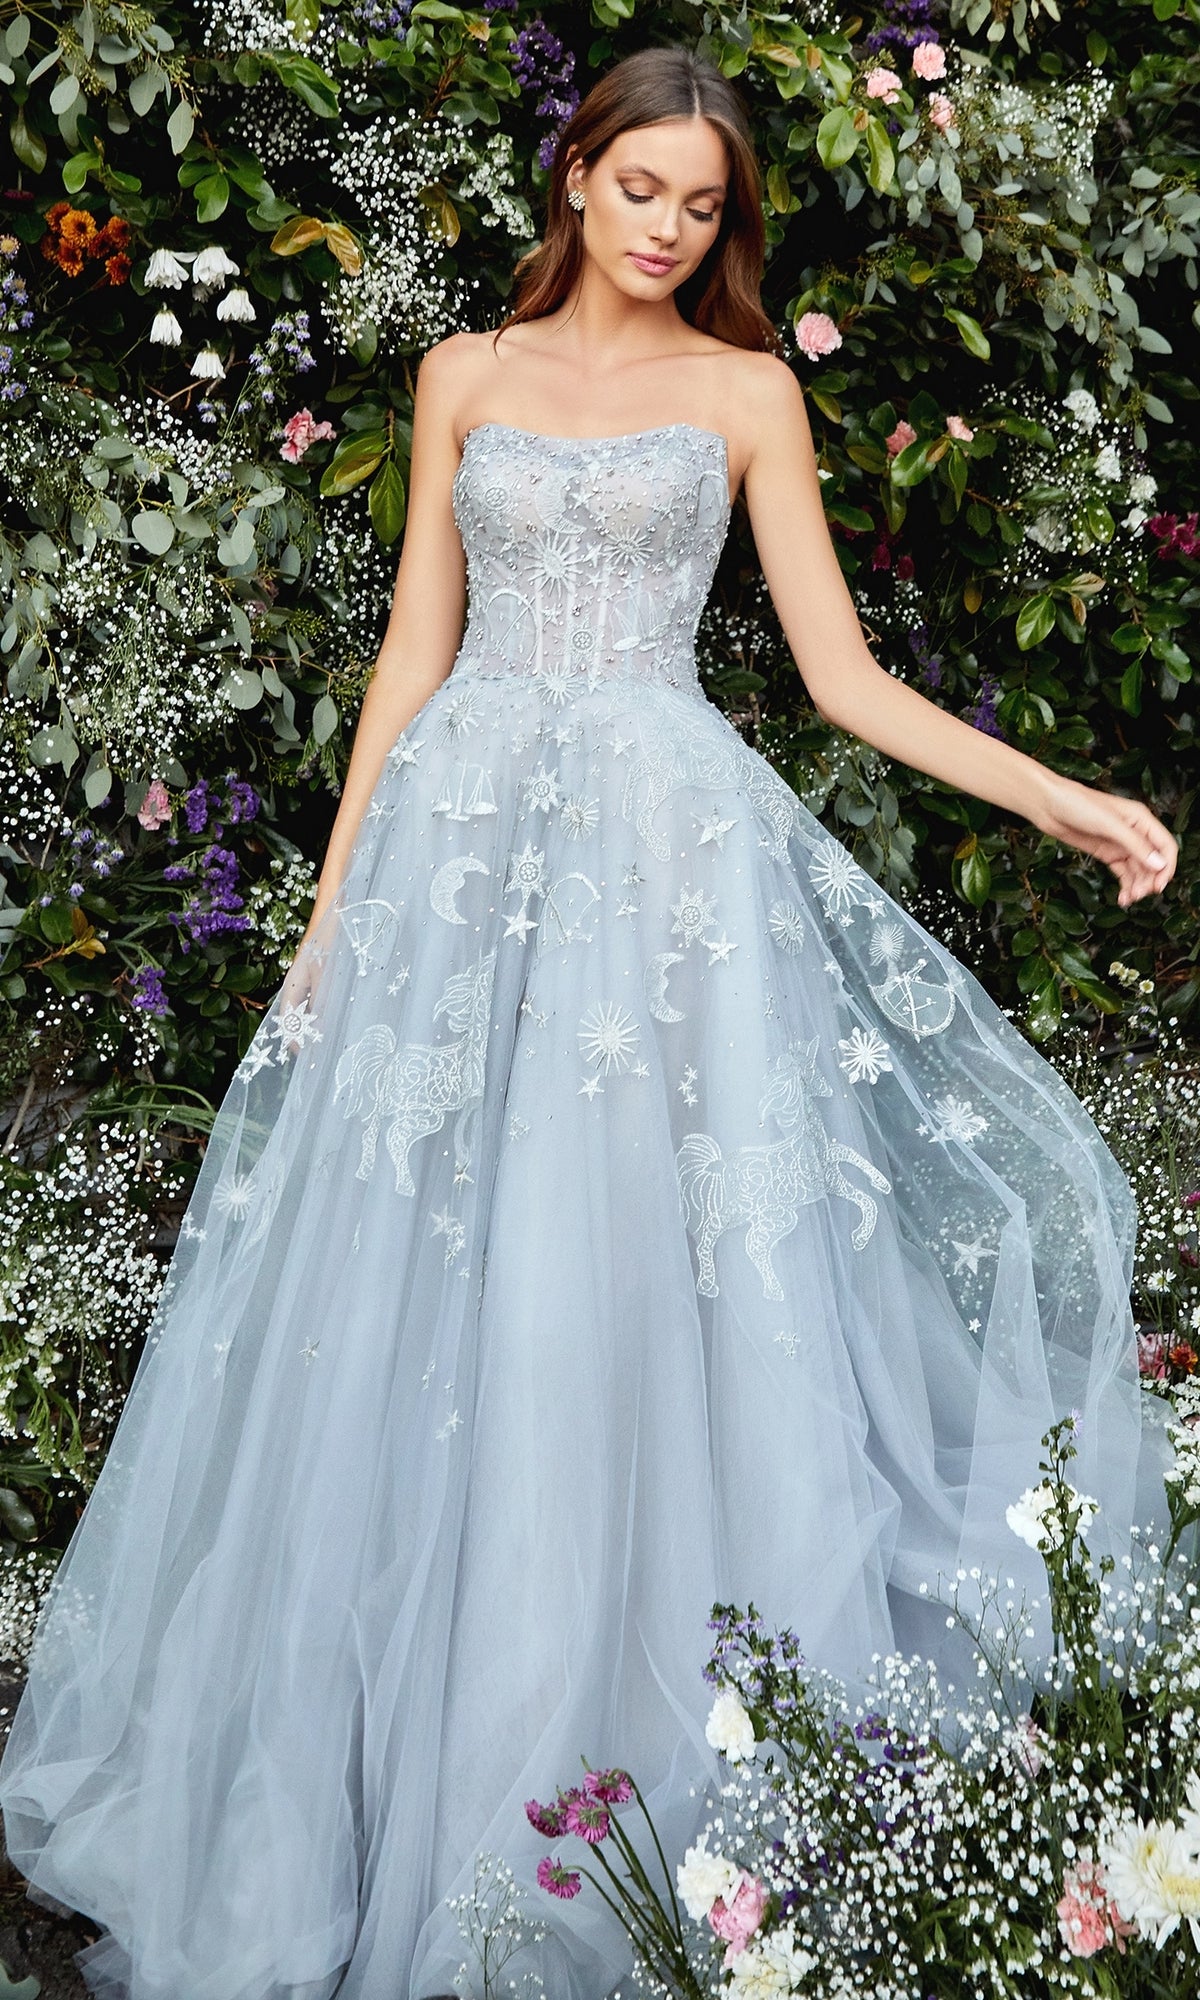 Constellation-Print Strapless Prom Ball Gown A0890